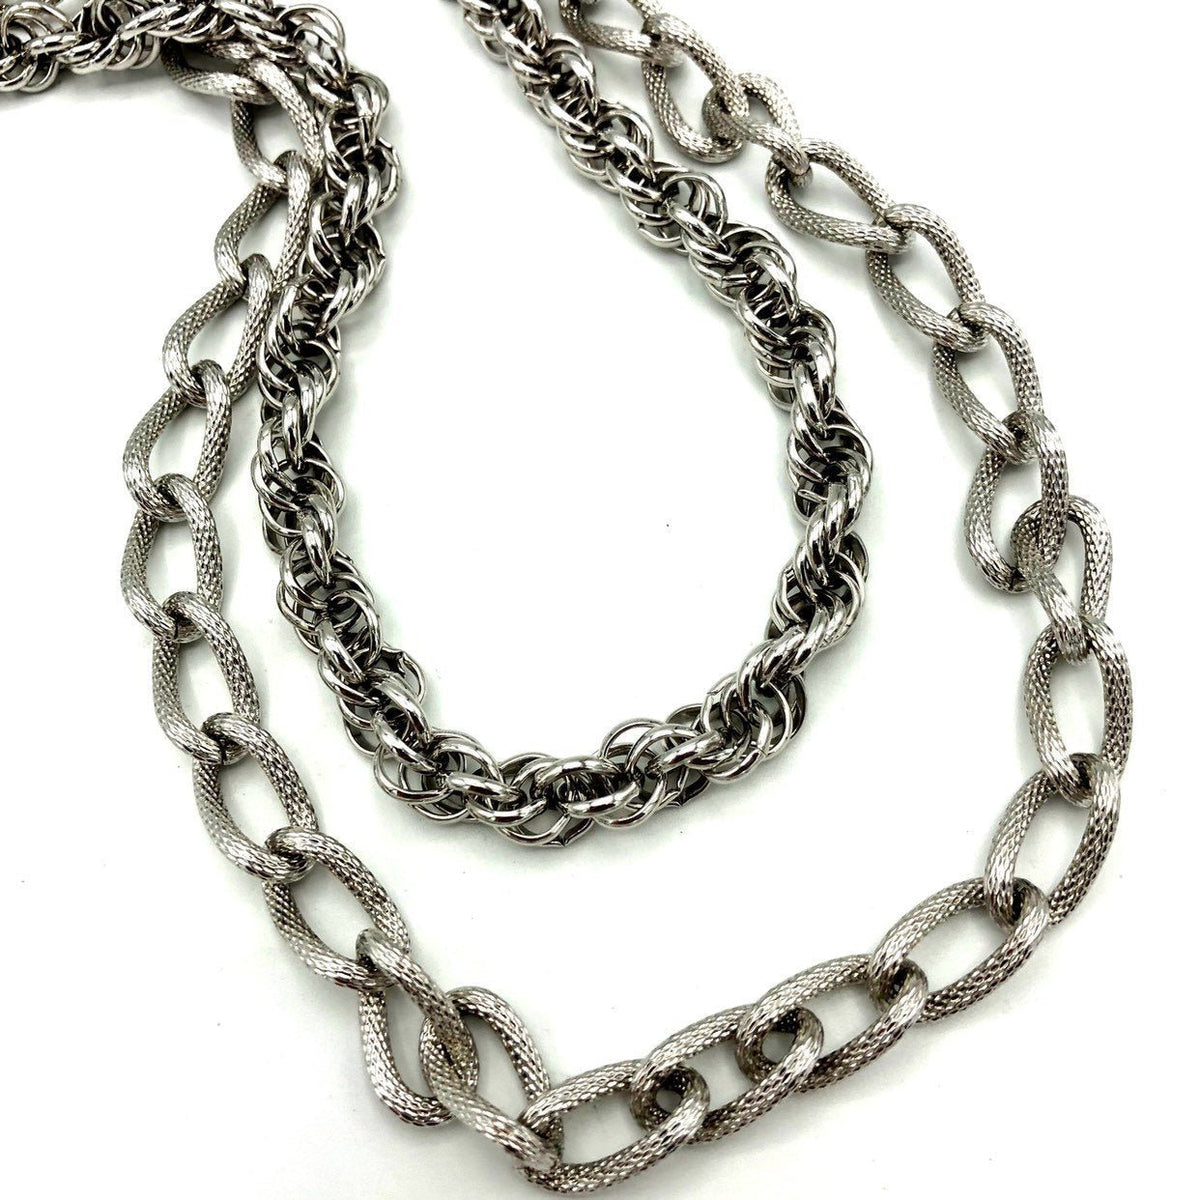 Silver Monet Layered Long Multi-Strand Chain Vintage Necklace - 24 Wishes Vintage Jewelry